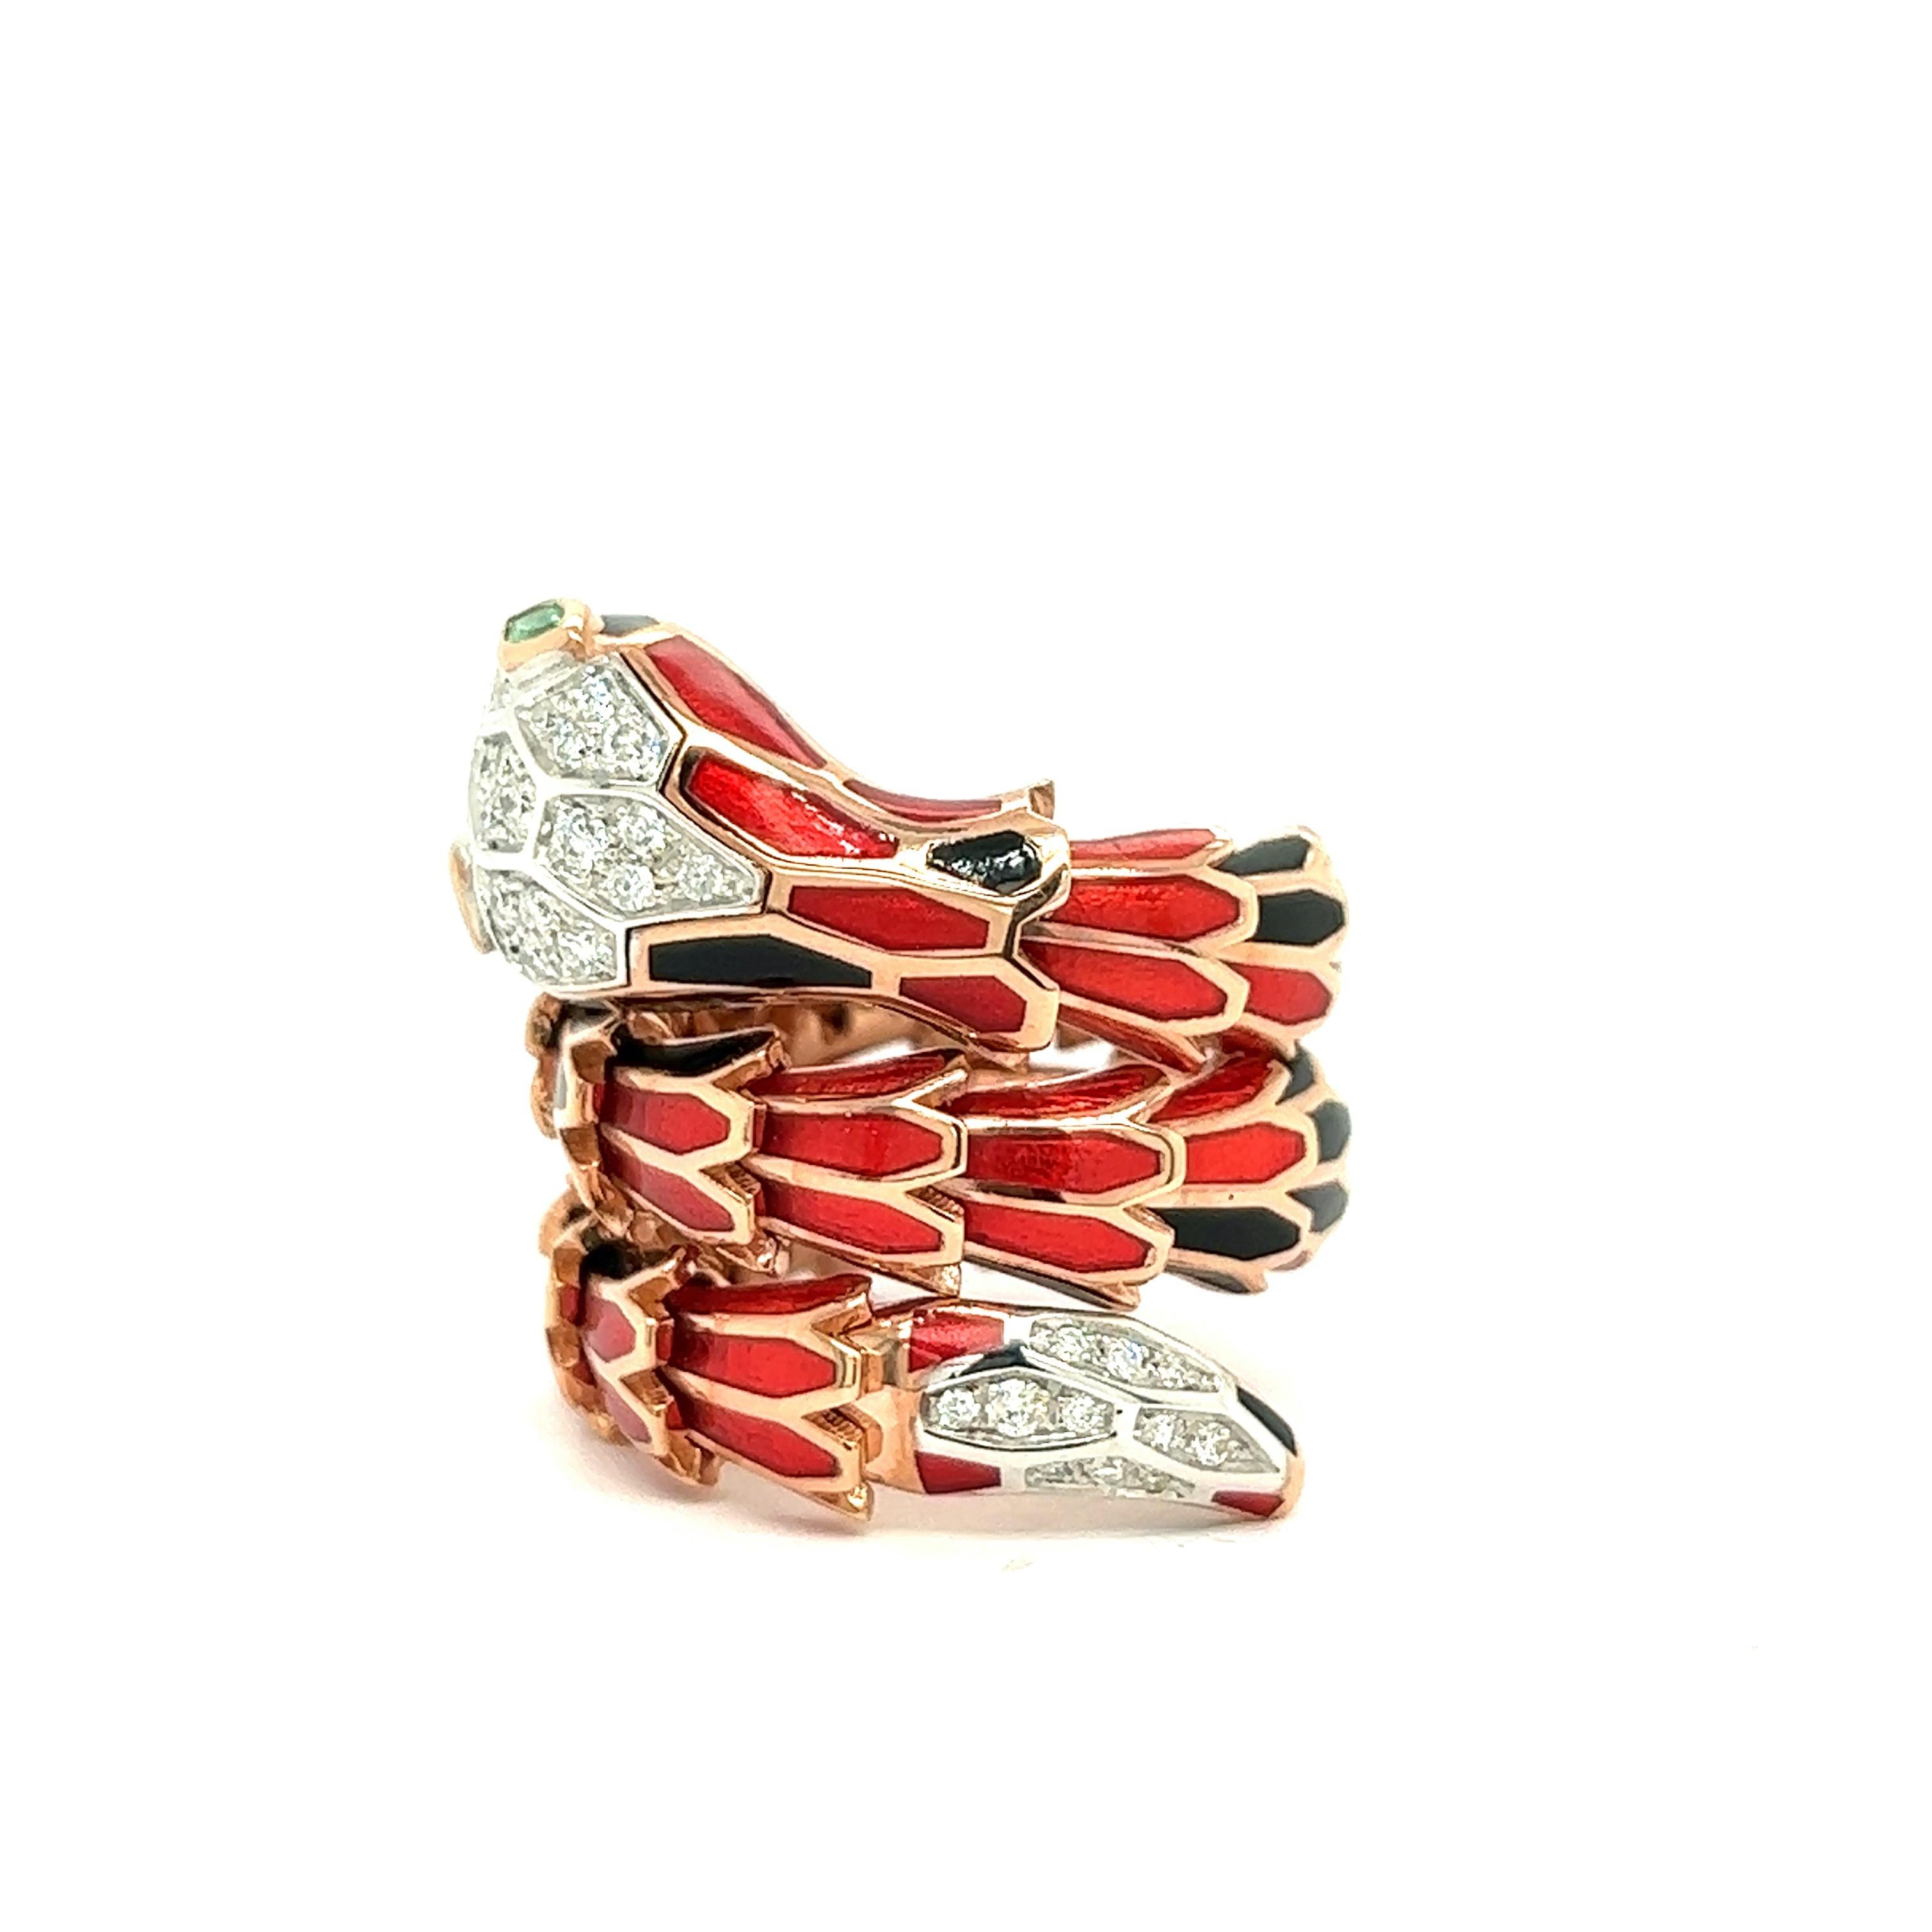 Alexis NY Transparent Red & Black Enamel Wrap Ring

The body is made of sterling silver with a tone of rose gold; the head and tail are made of 18 karat white gold; the white gold is set with round-cut diamonds of 0.32 carat and marquise-shaped